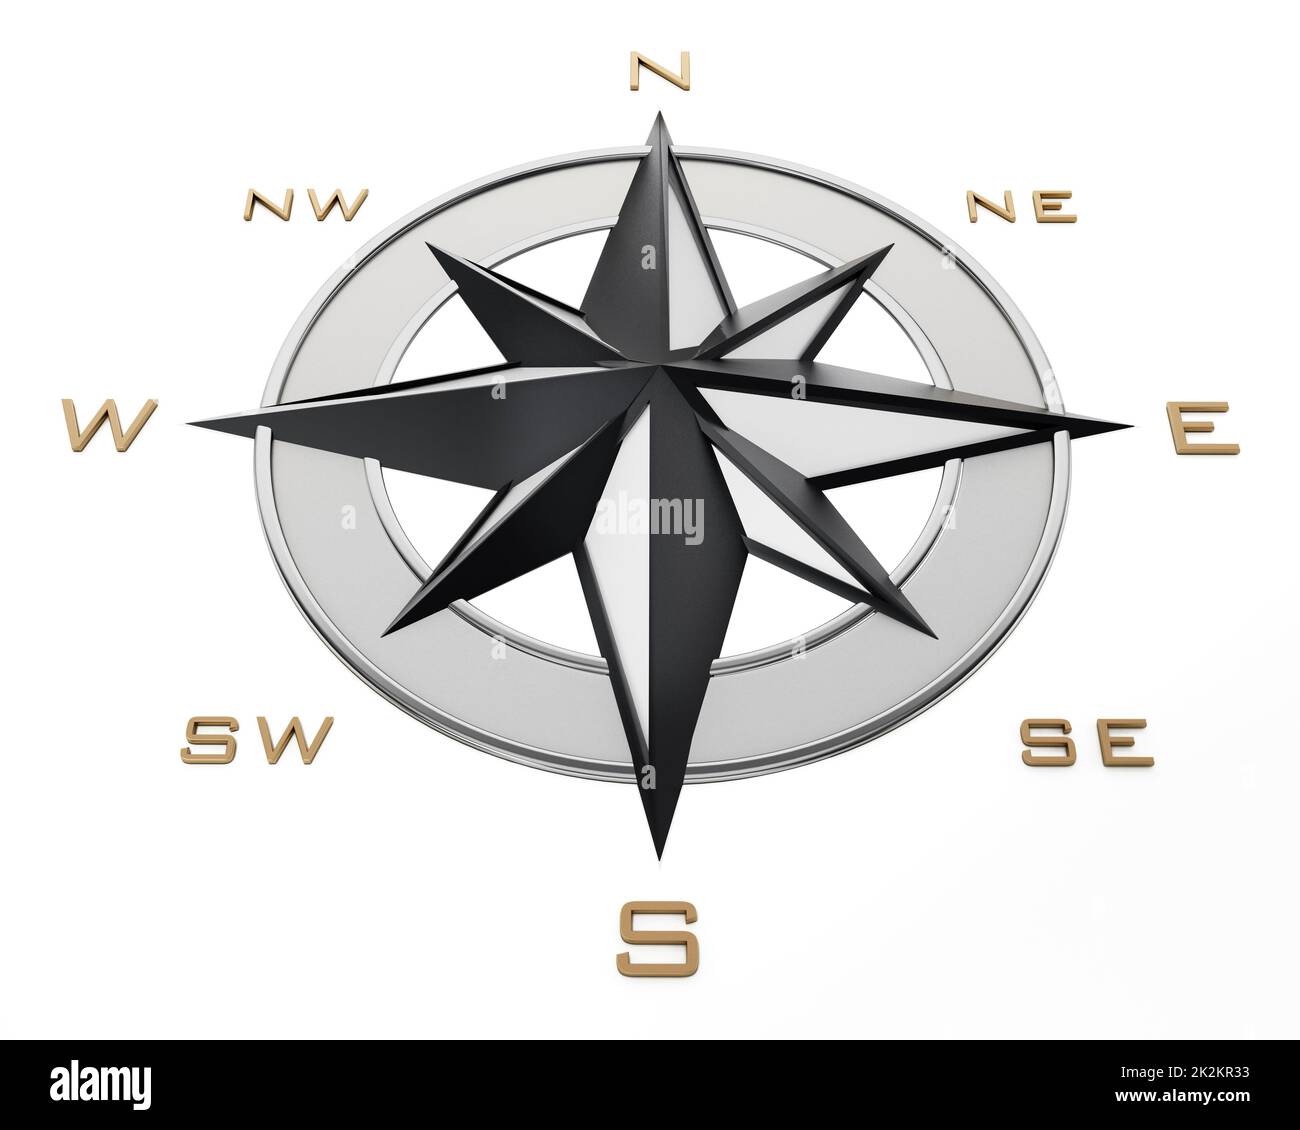 Vintage compass symbol showing the directions. 3D illustration Stock Photo